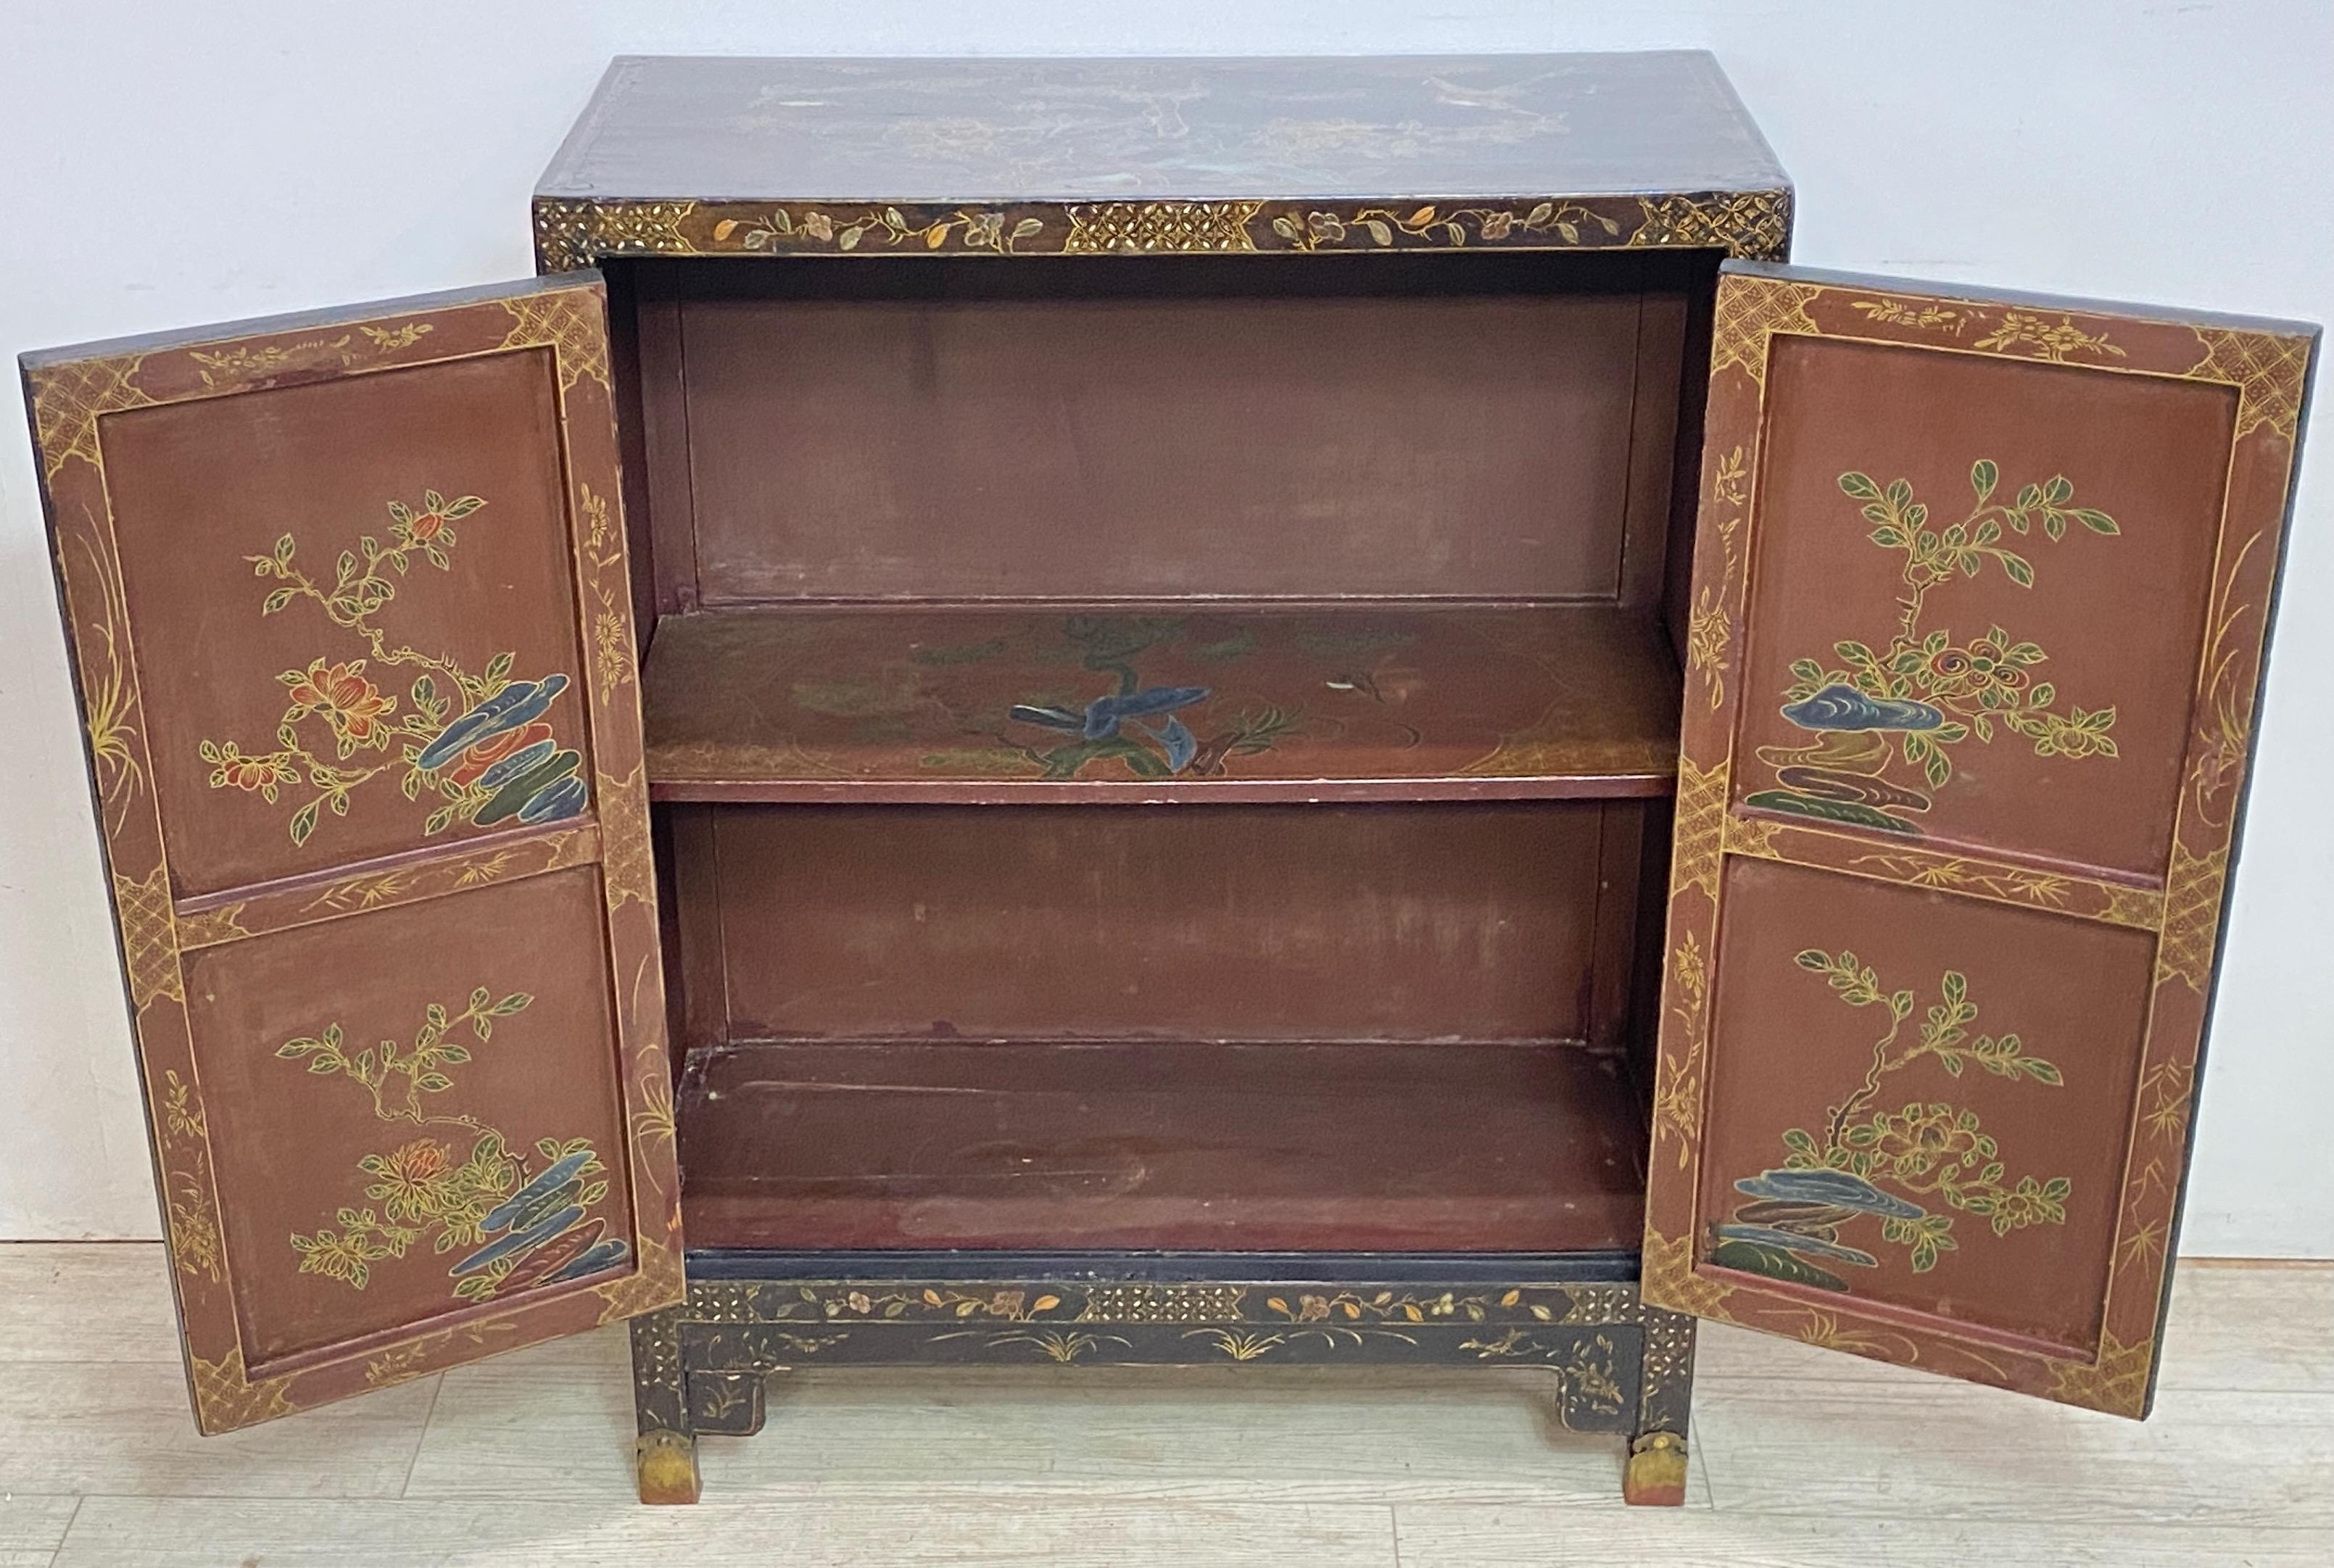  Pair of Chinese Laquer and Hardstone Cabinets, Late 19th - Early 20th Century For Sale 4